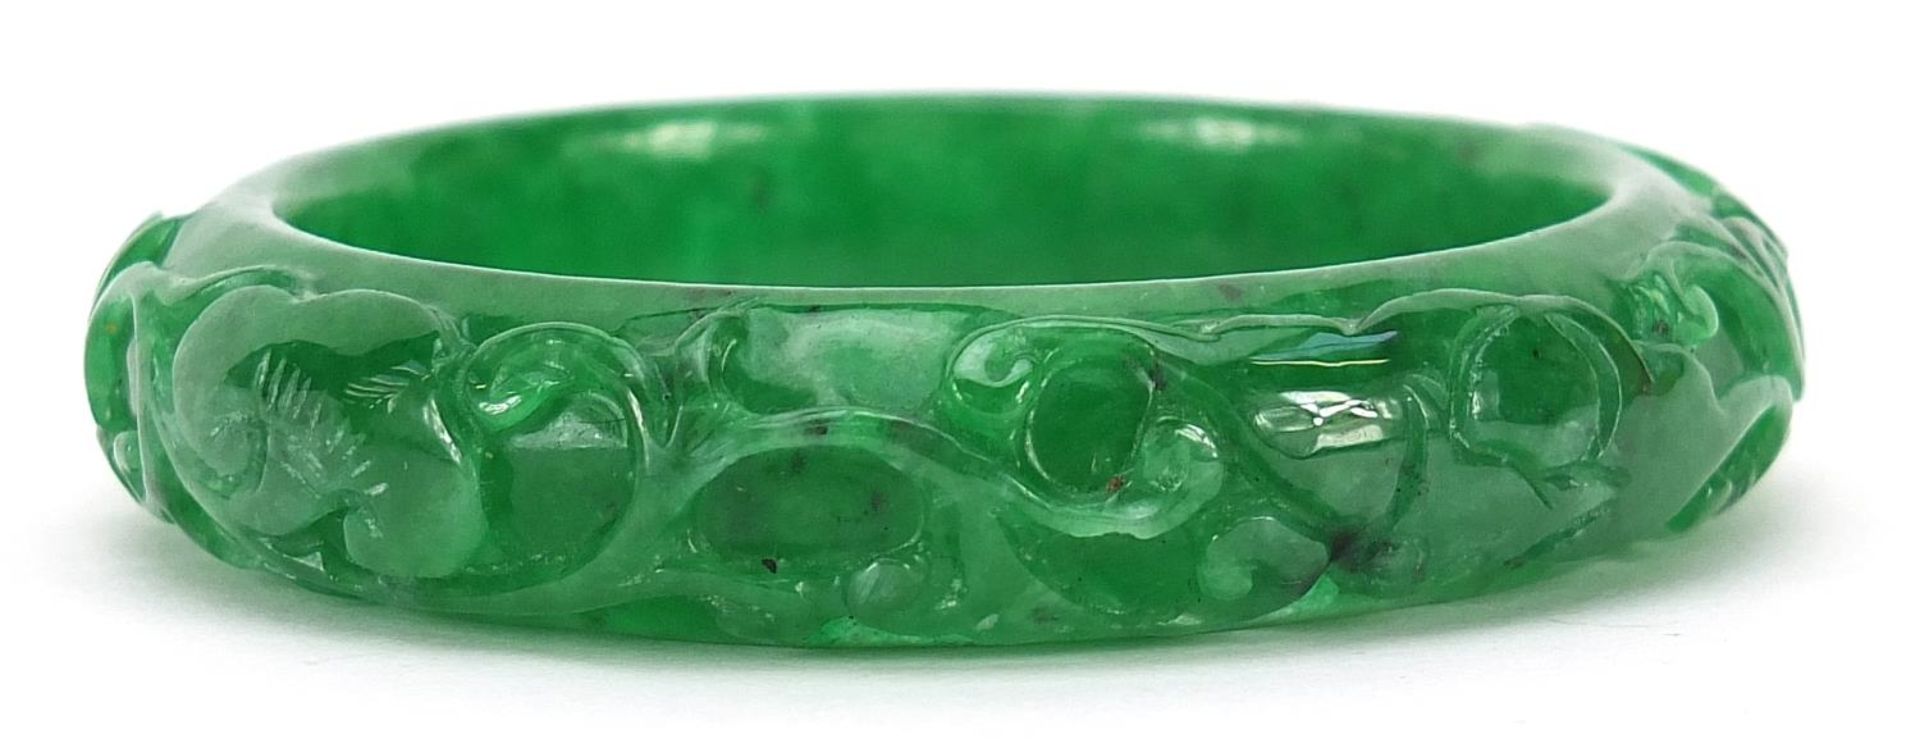 Chinese green jade bangle carved with a fish amongst aquatic foliage, 7cm in diameter, 56.7g - Image 2 of 2